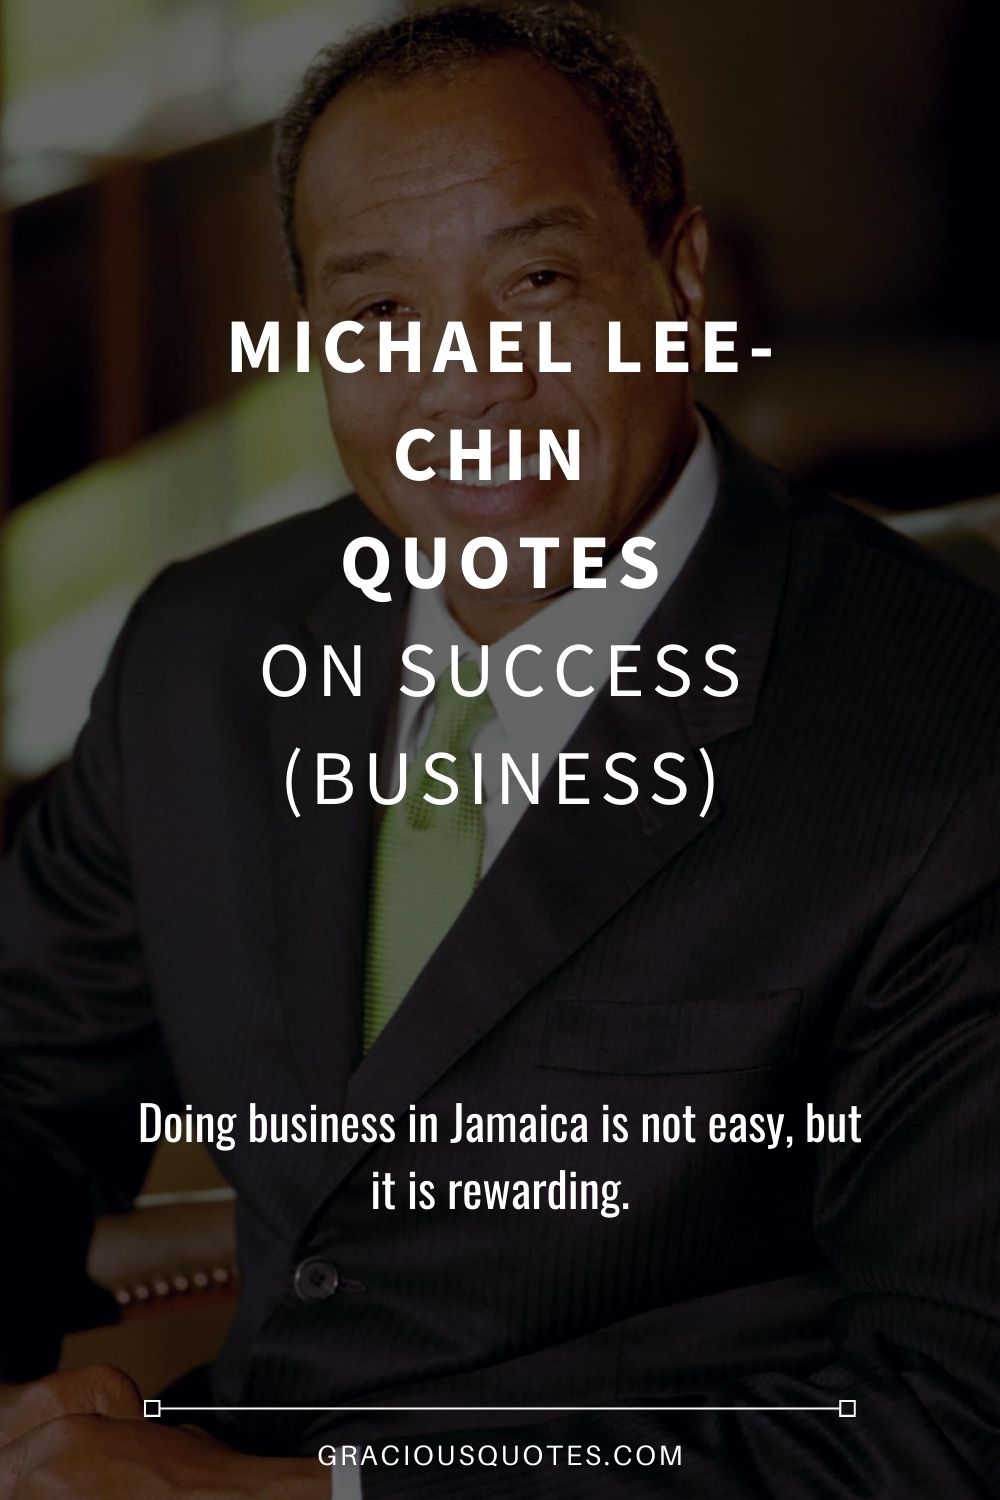 Michael Lee-Chin Quotes on Success (BUSINESS) - Gracious Quotes